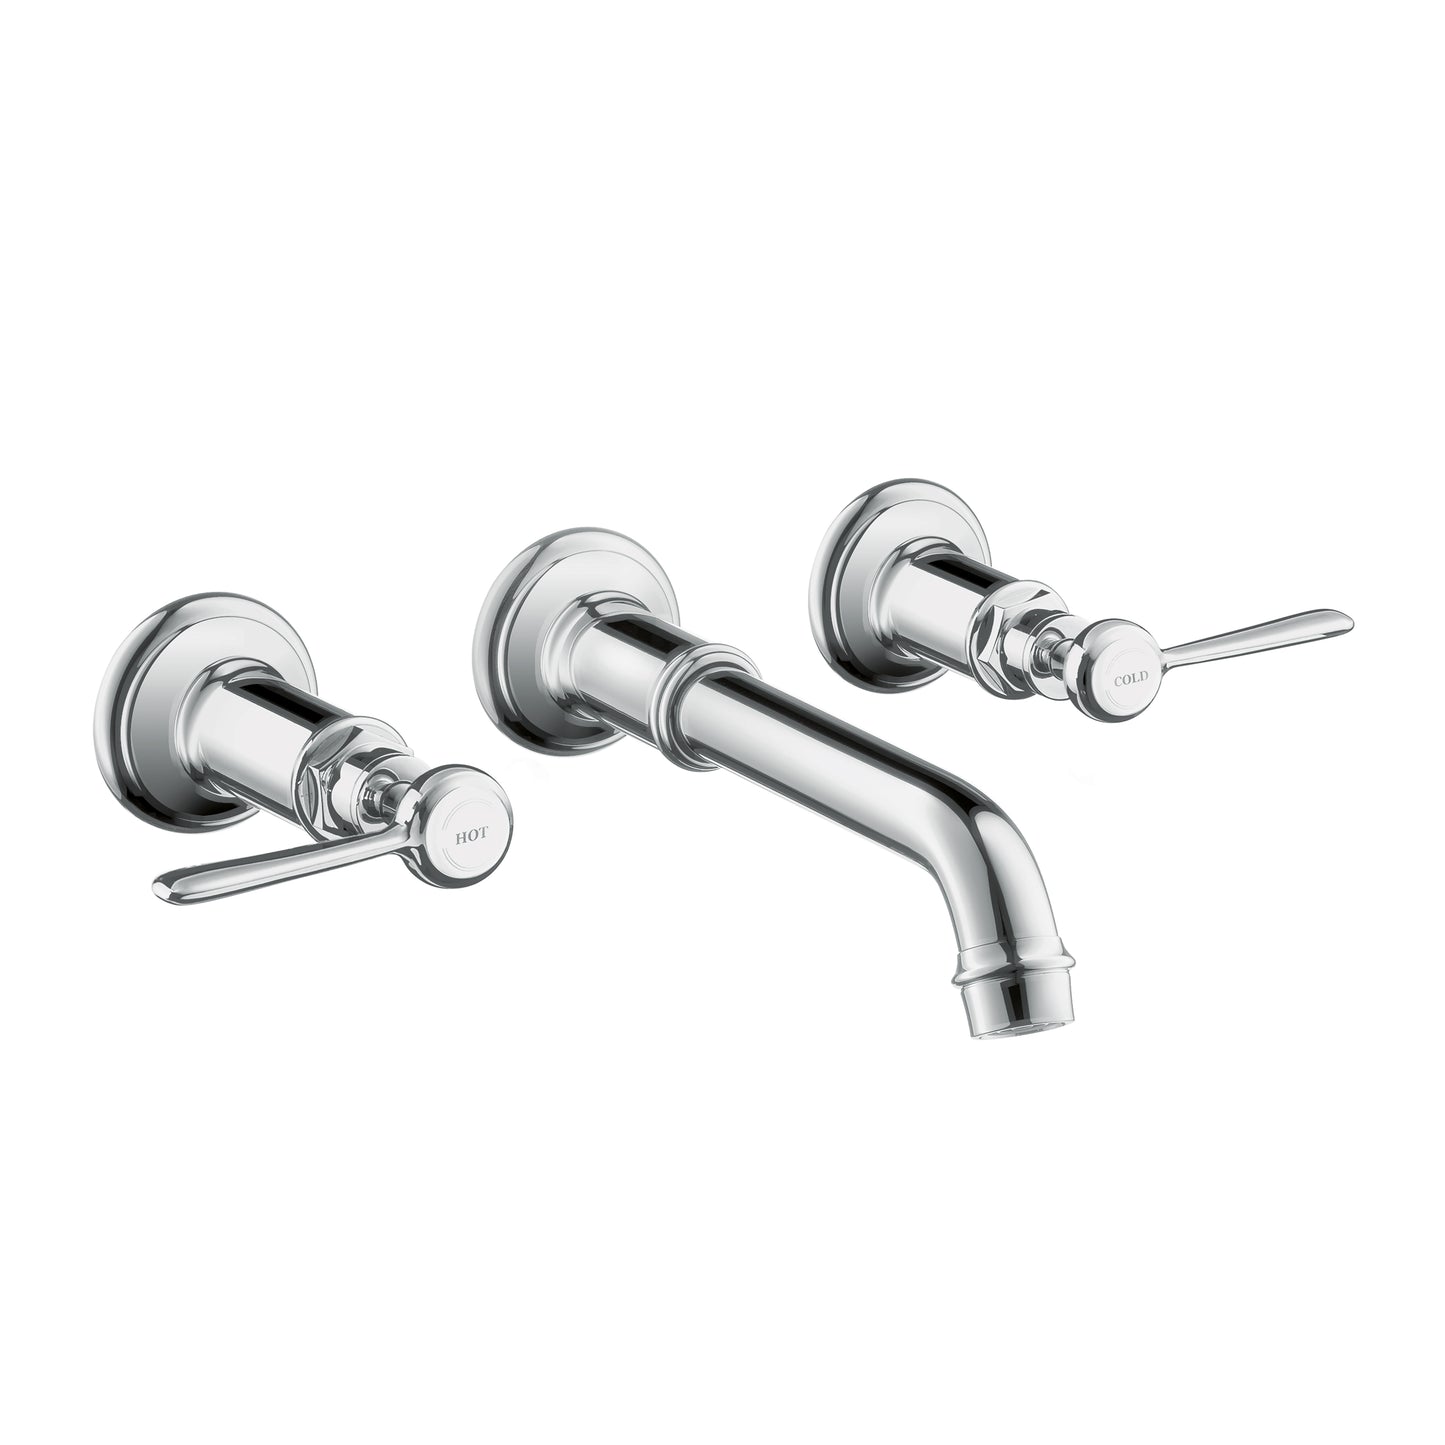 AXOR 16534001 Chrome Montreux Classic Widespread Bathroom Faucet 1.2 GPM